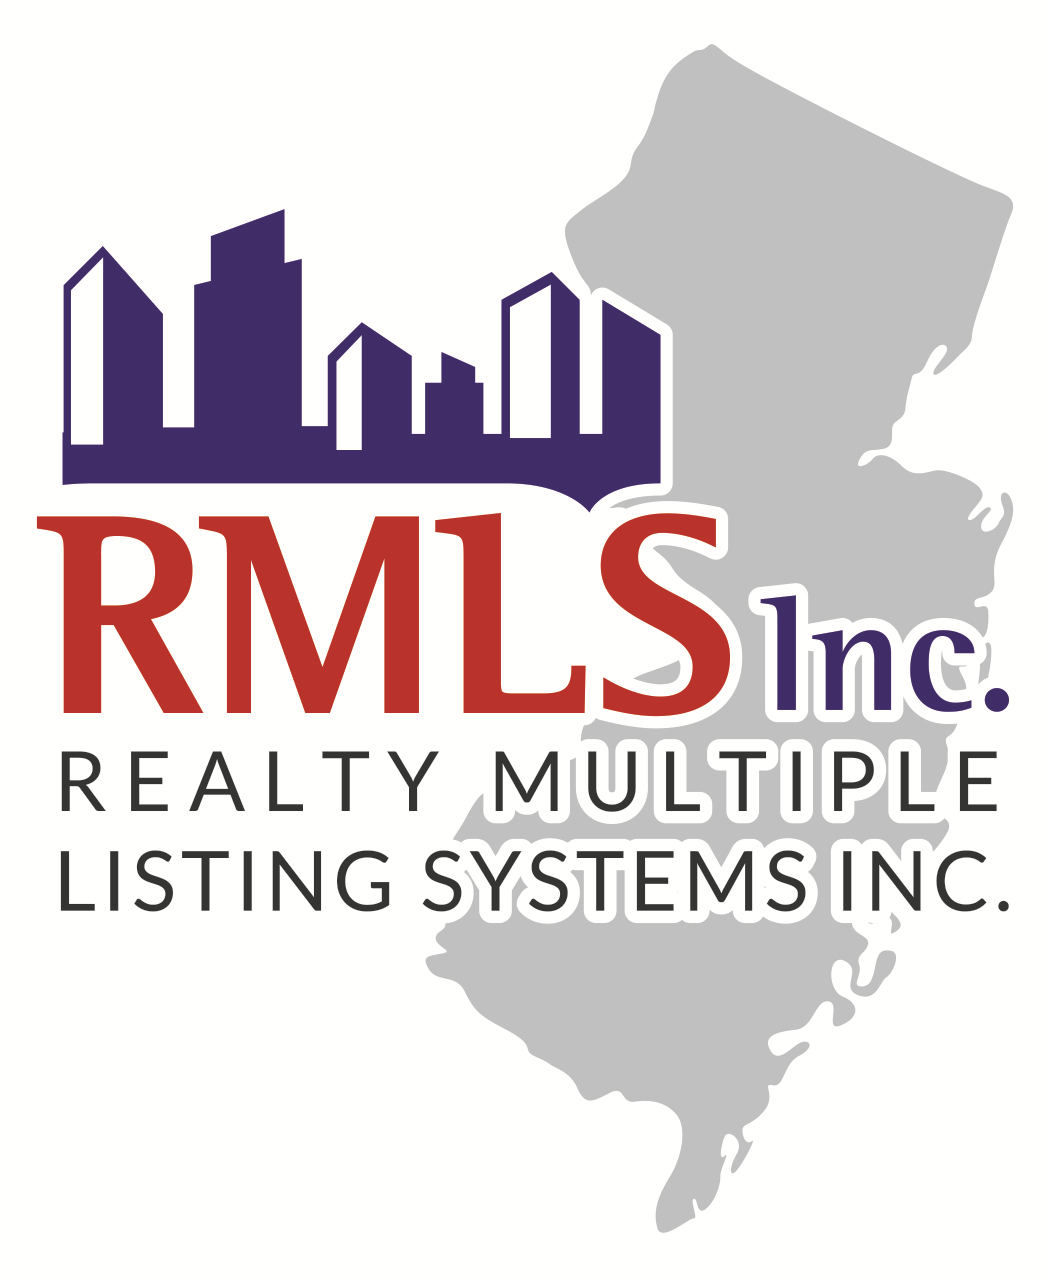 www.mlsguide.com: Contact agent about this listing